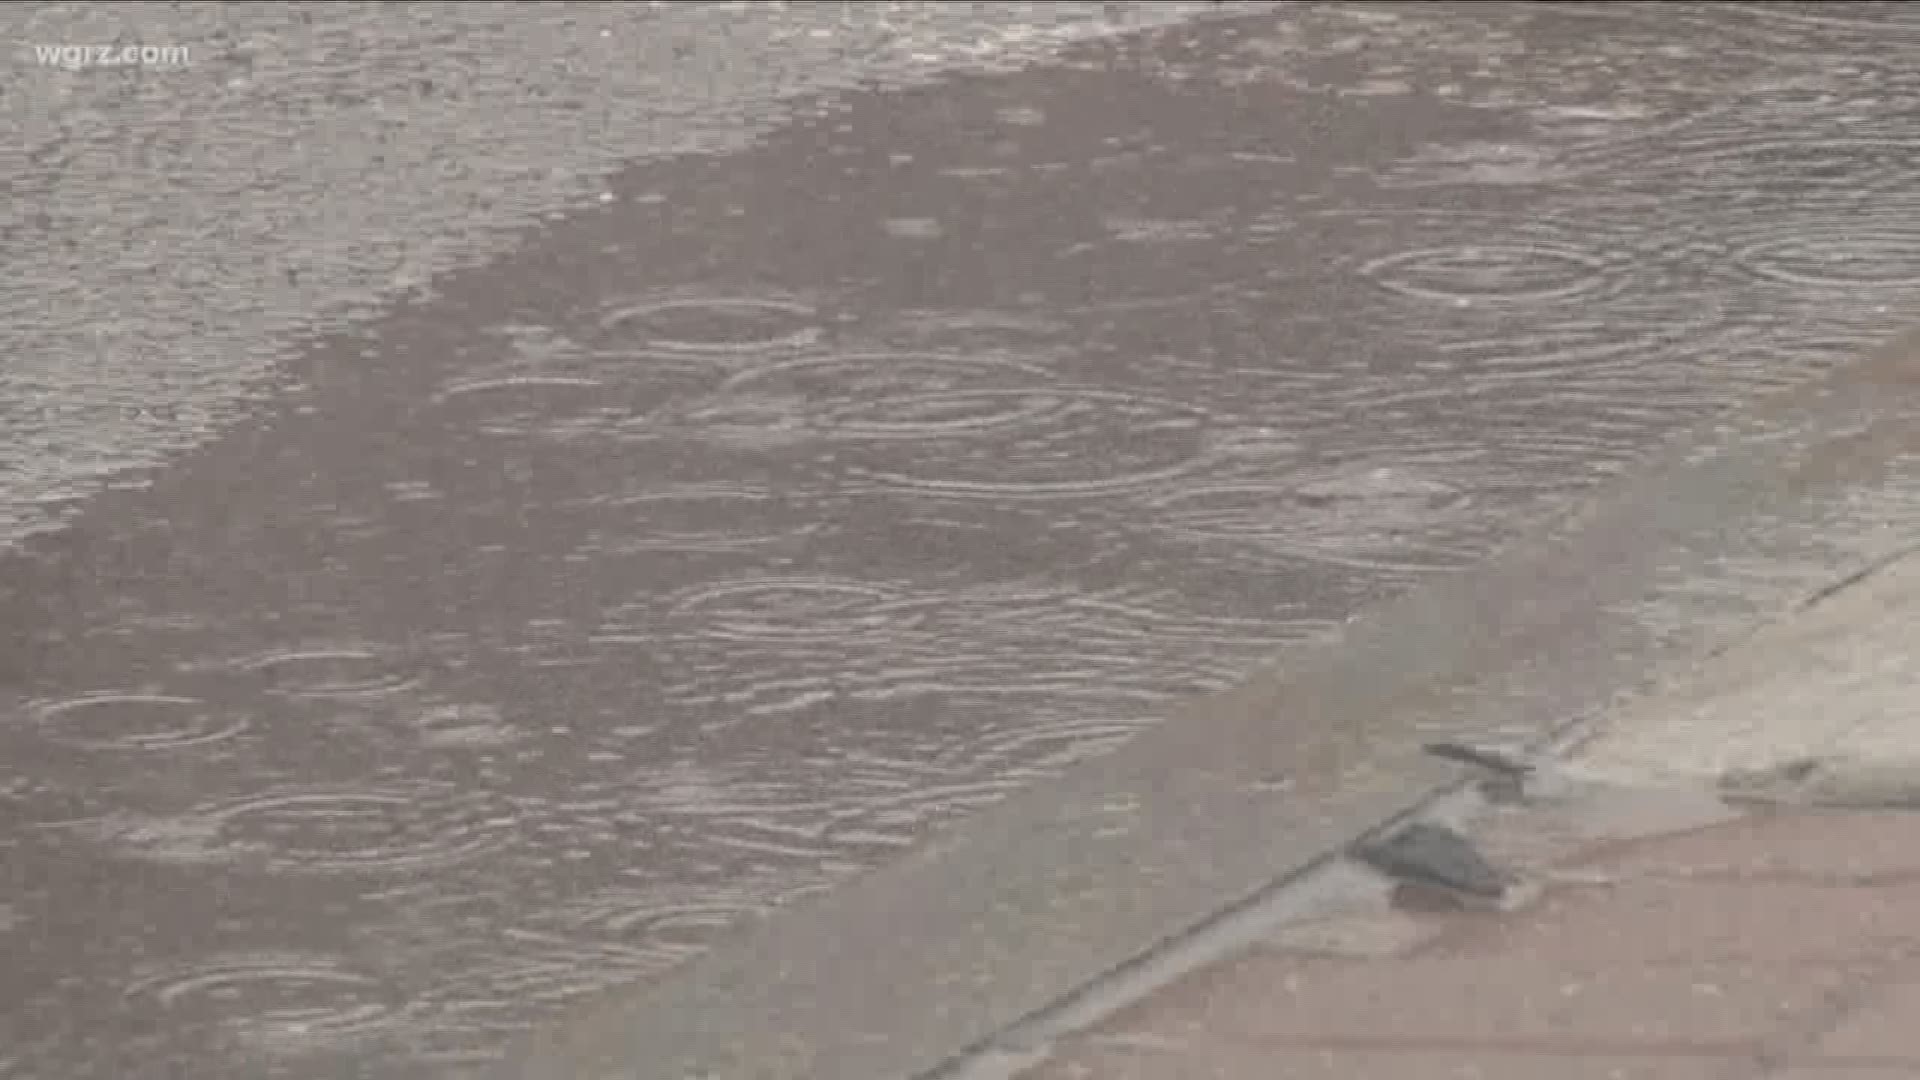 Millions Of Gallons Of Overflows This Weekend